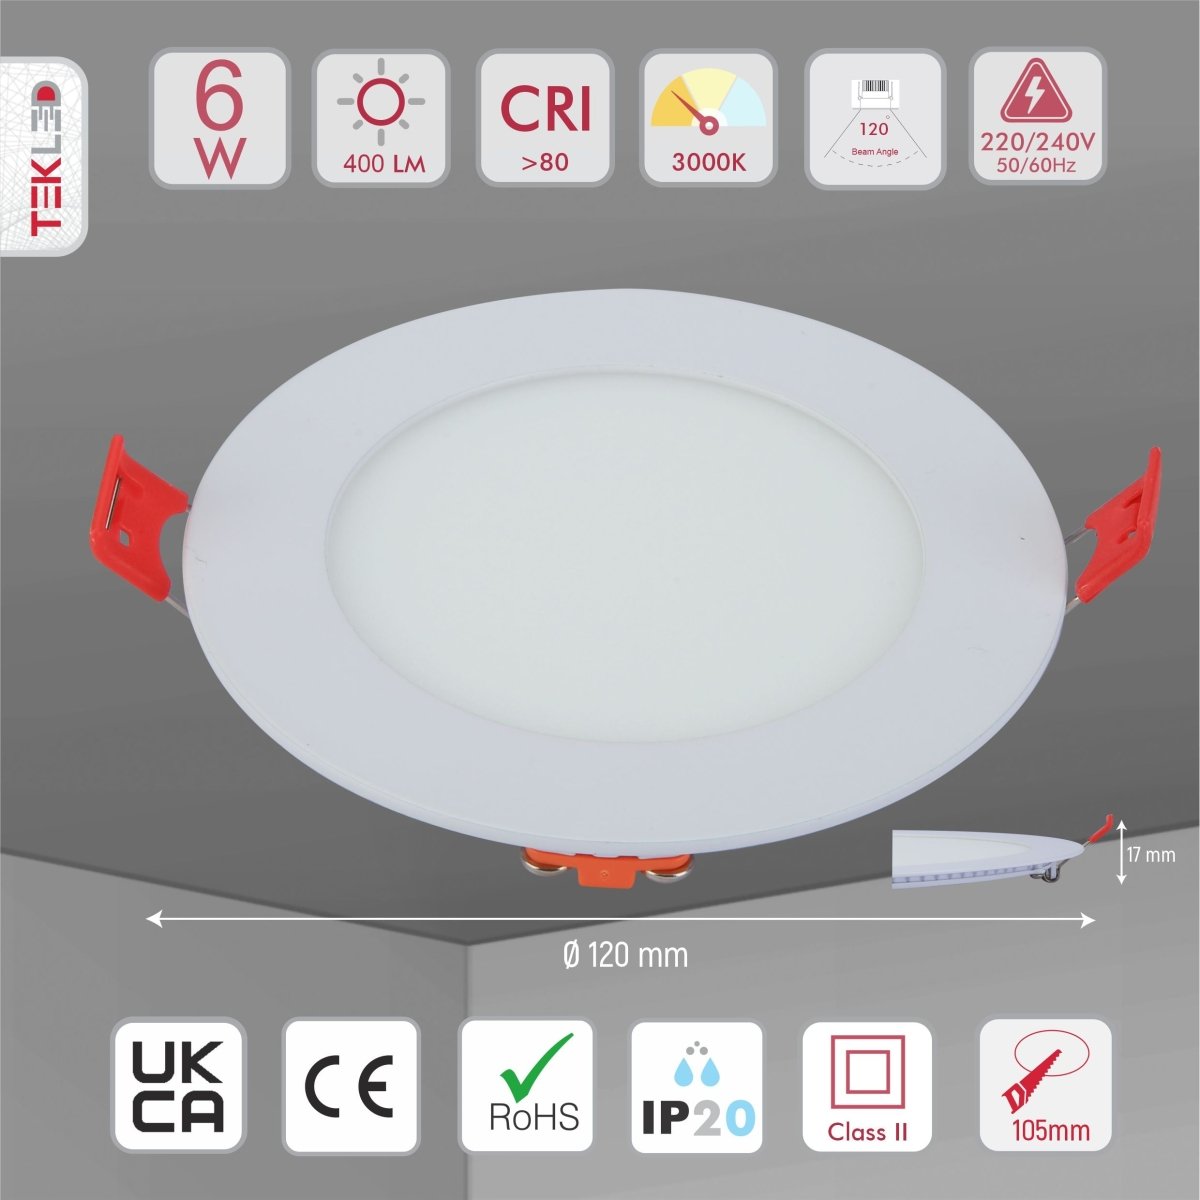 Product dimensions of downlight led round slim panel light 6w 3000k warm white d120mm